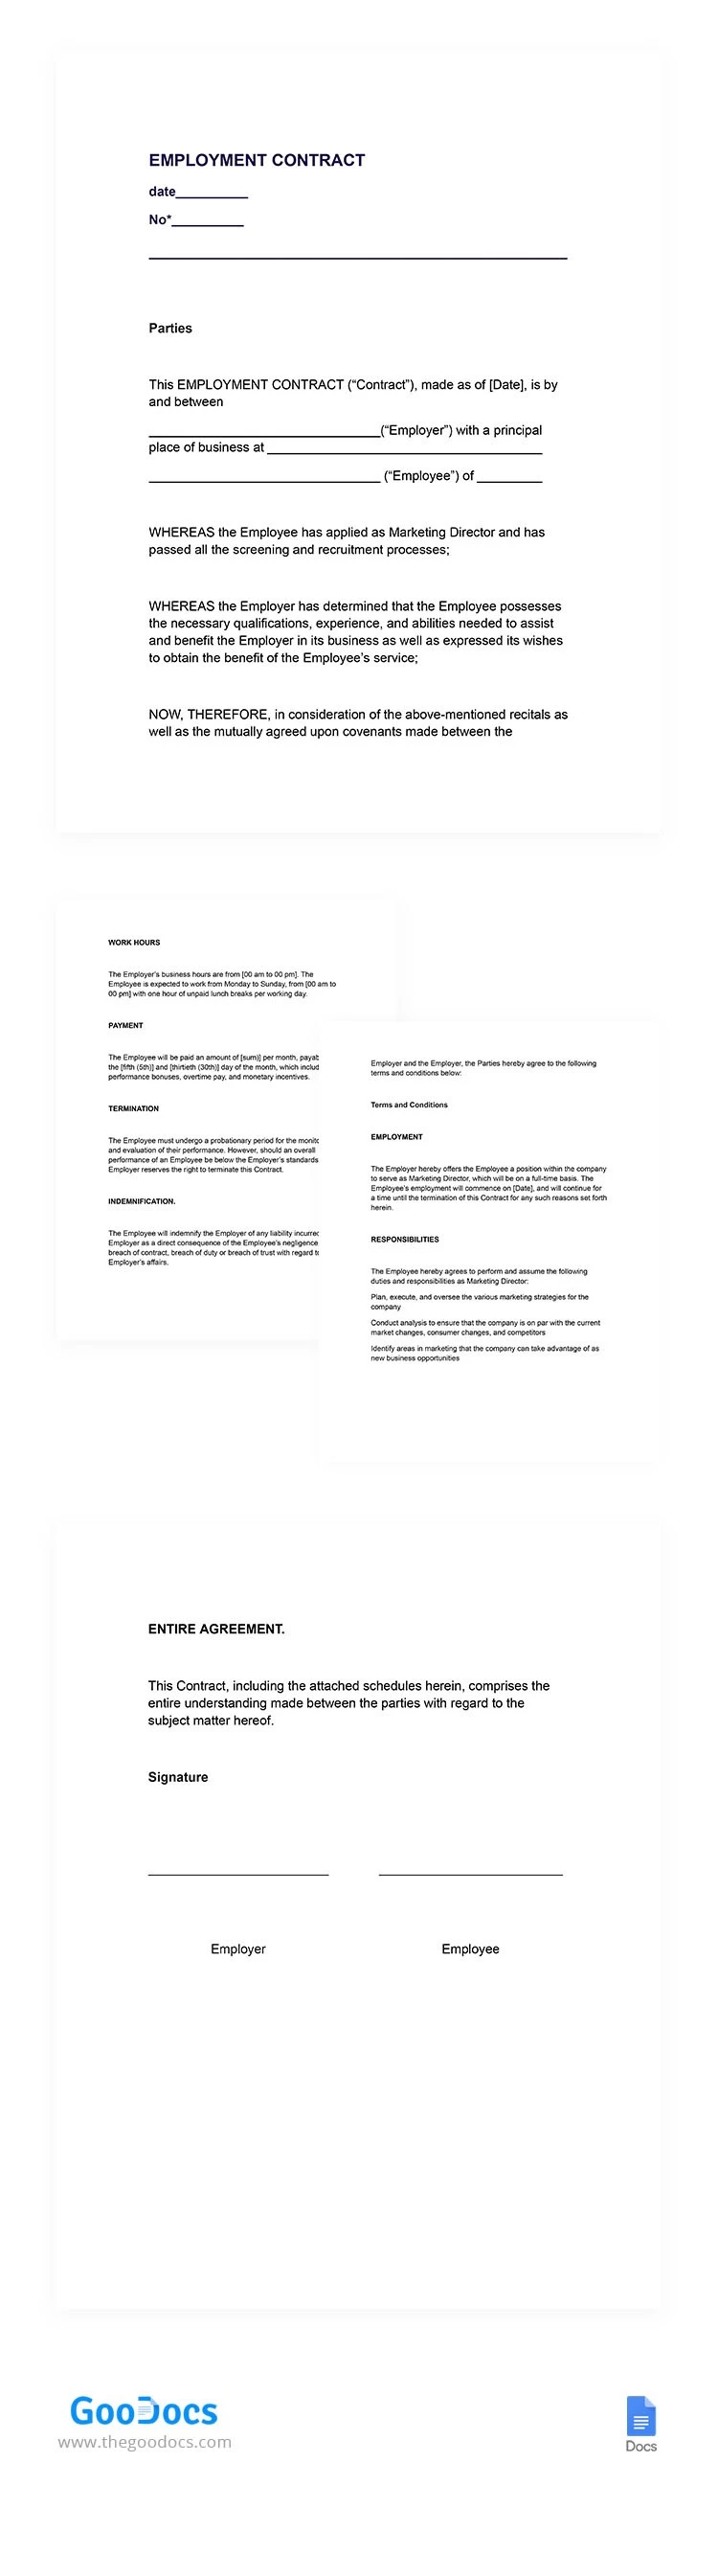 Employment Contract - free Google Docs Template - 10065721